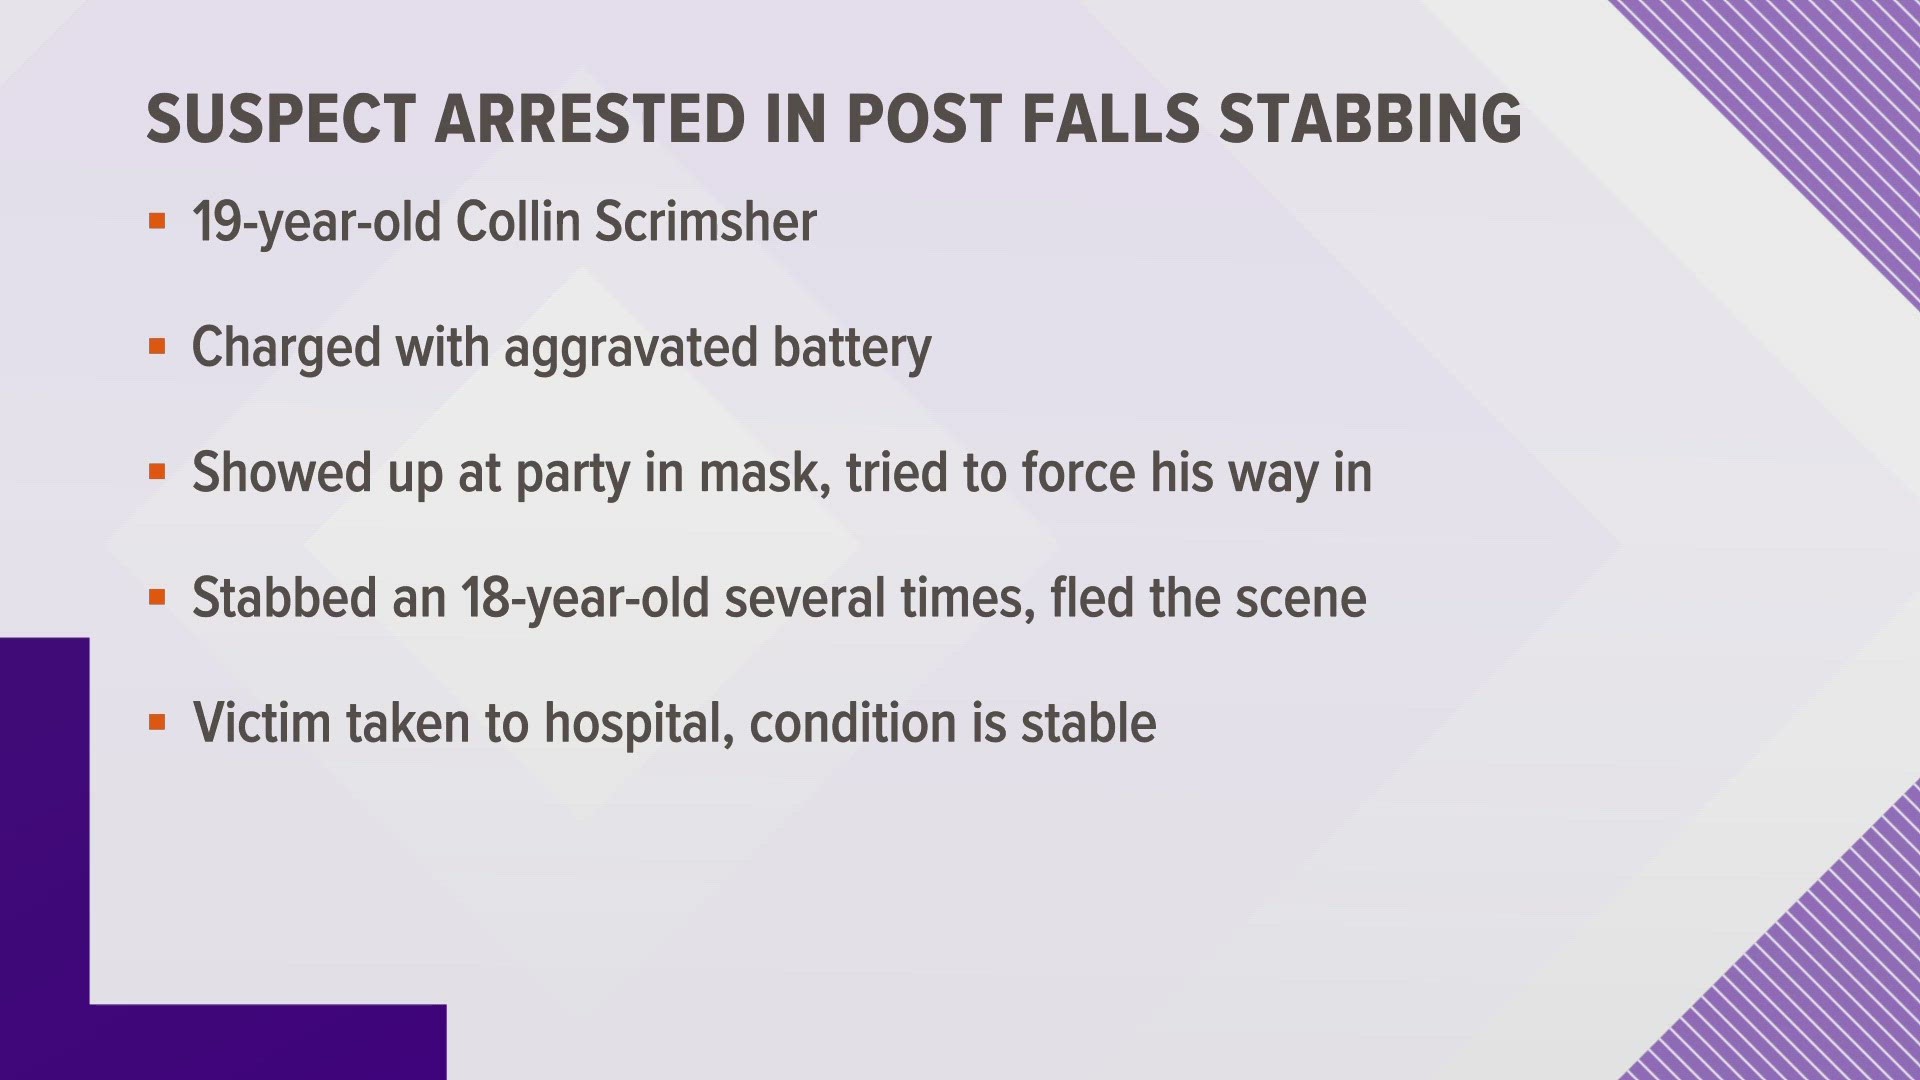 According to police, two men tried to force themselves into a house party, and one stabbed an 18-year-old male.